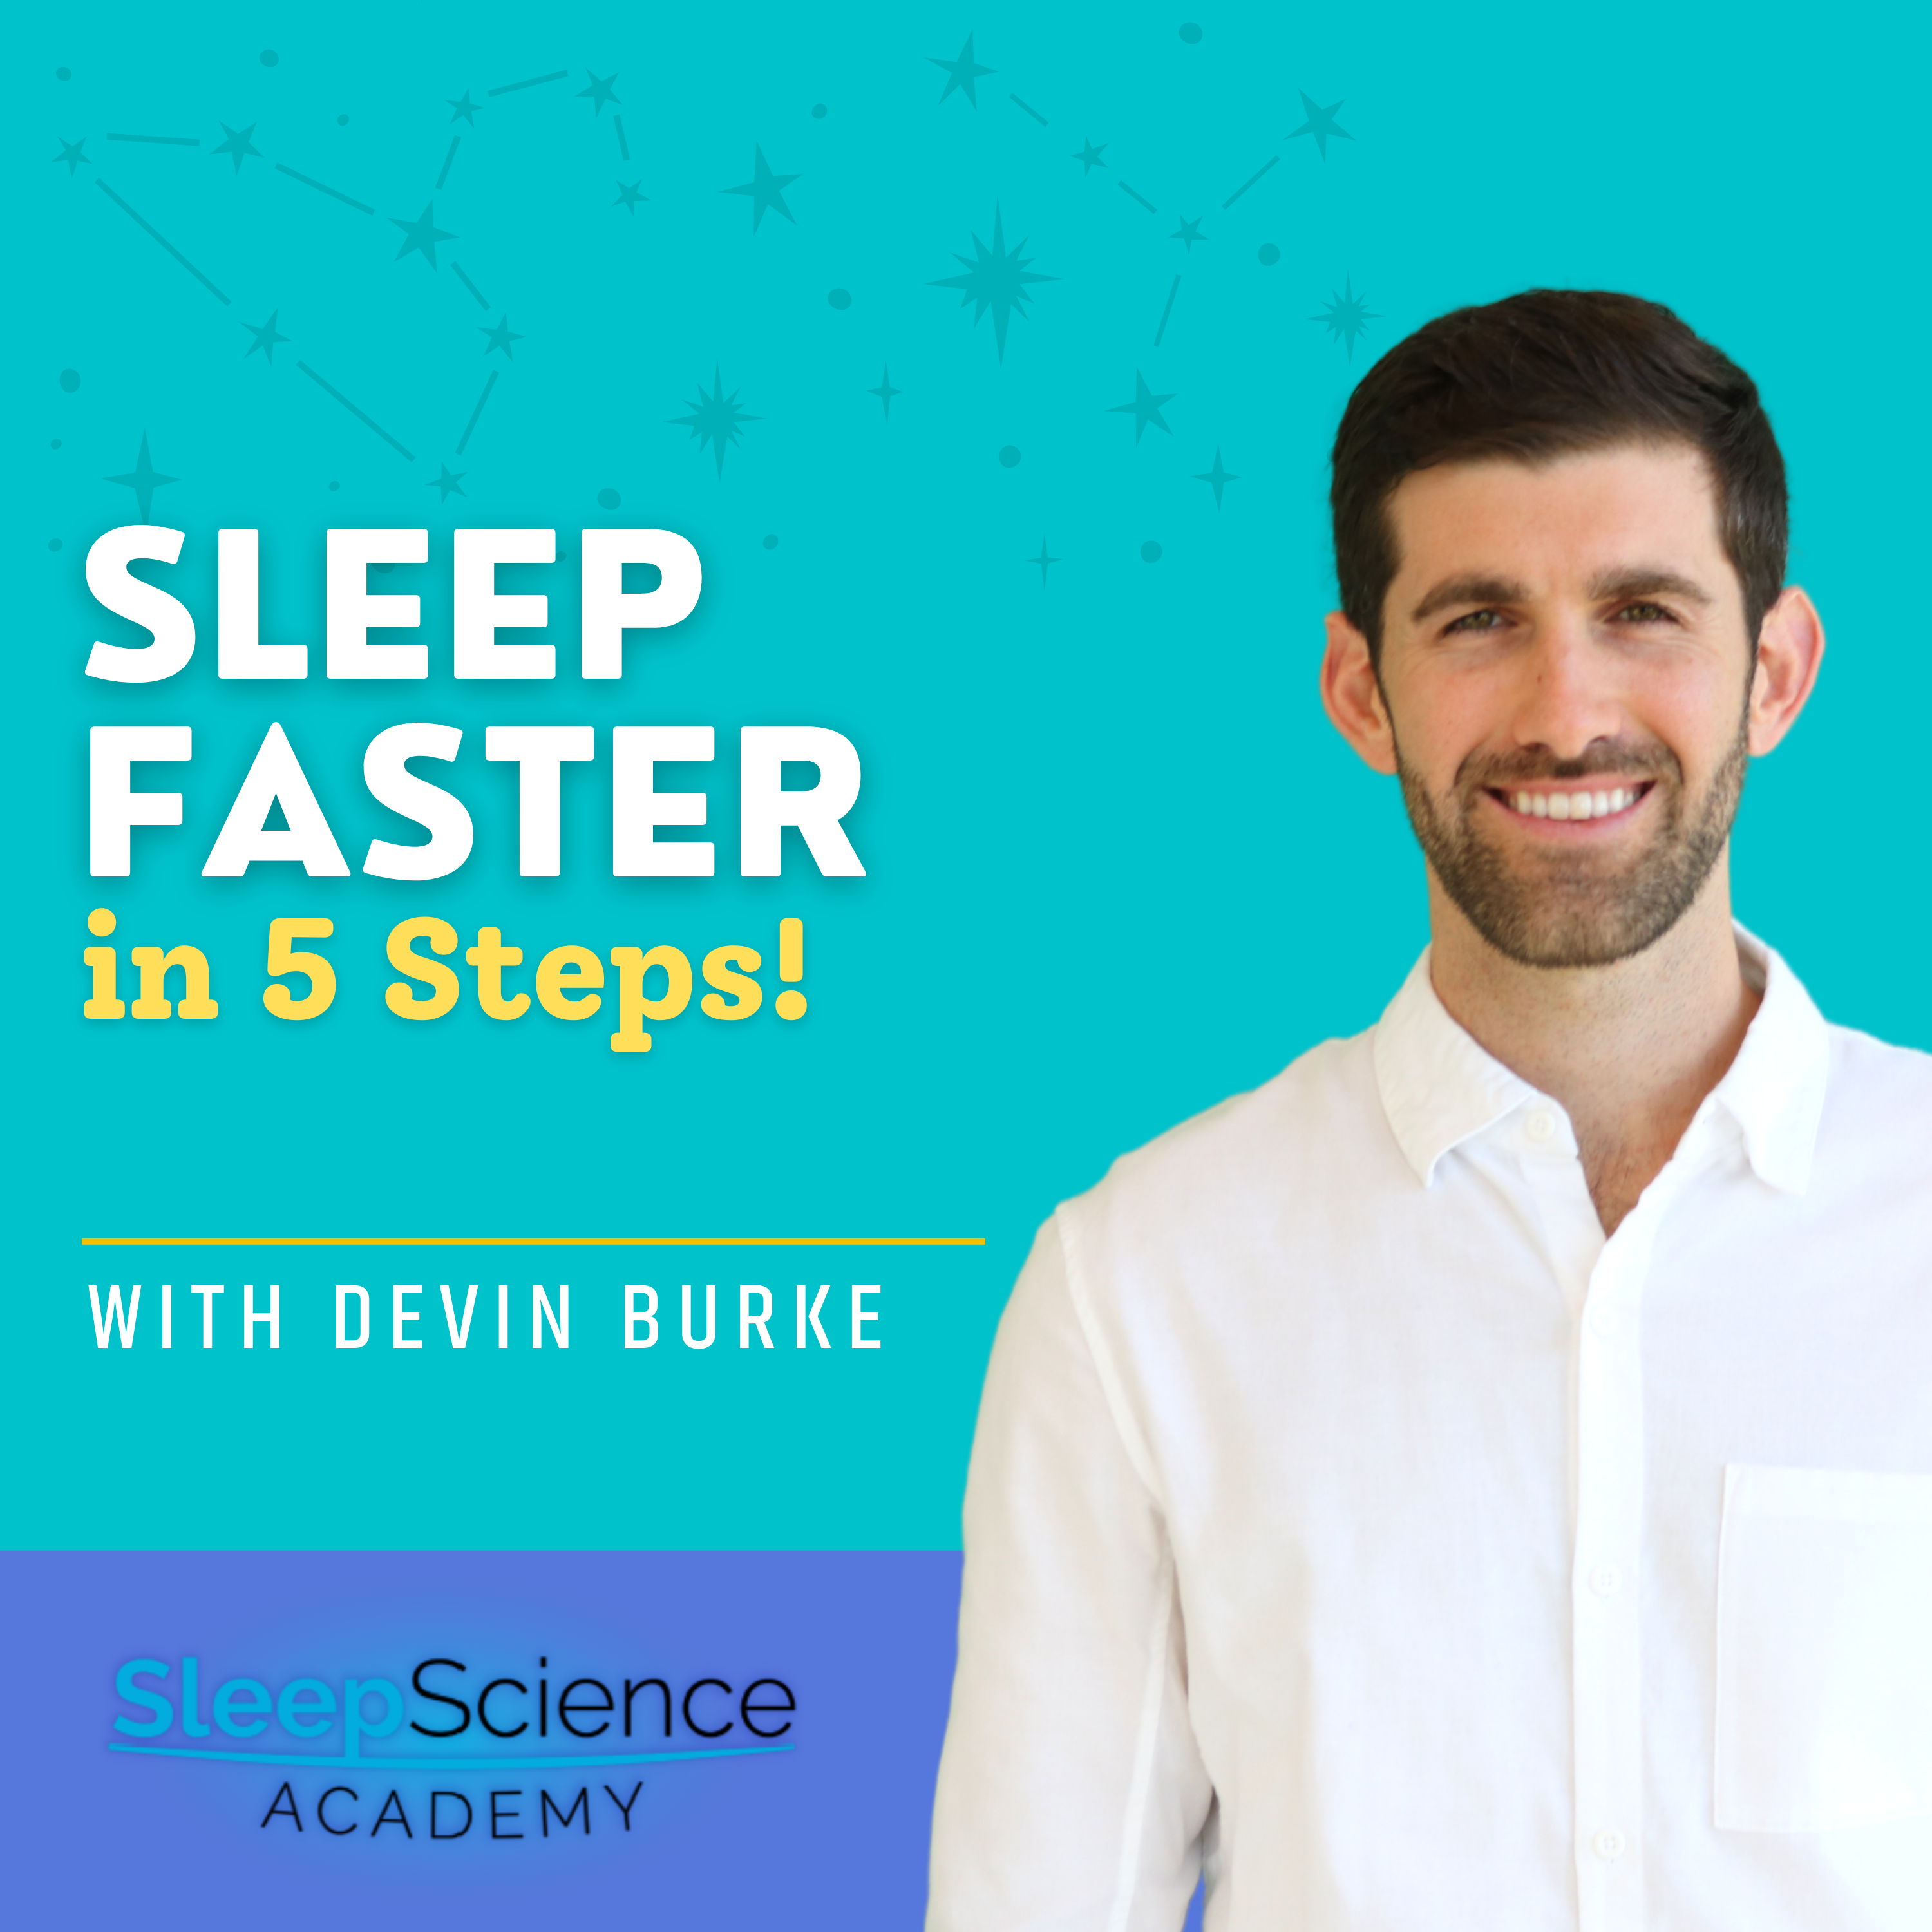 How To Sleep Faster – 5 Simple Steps